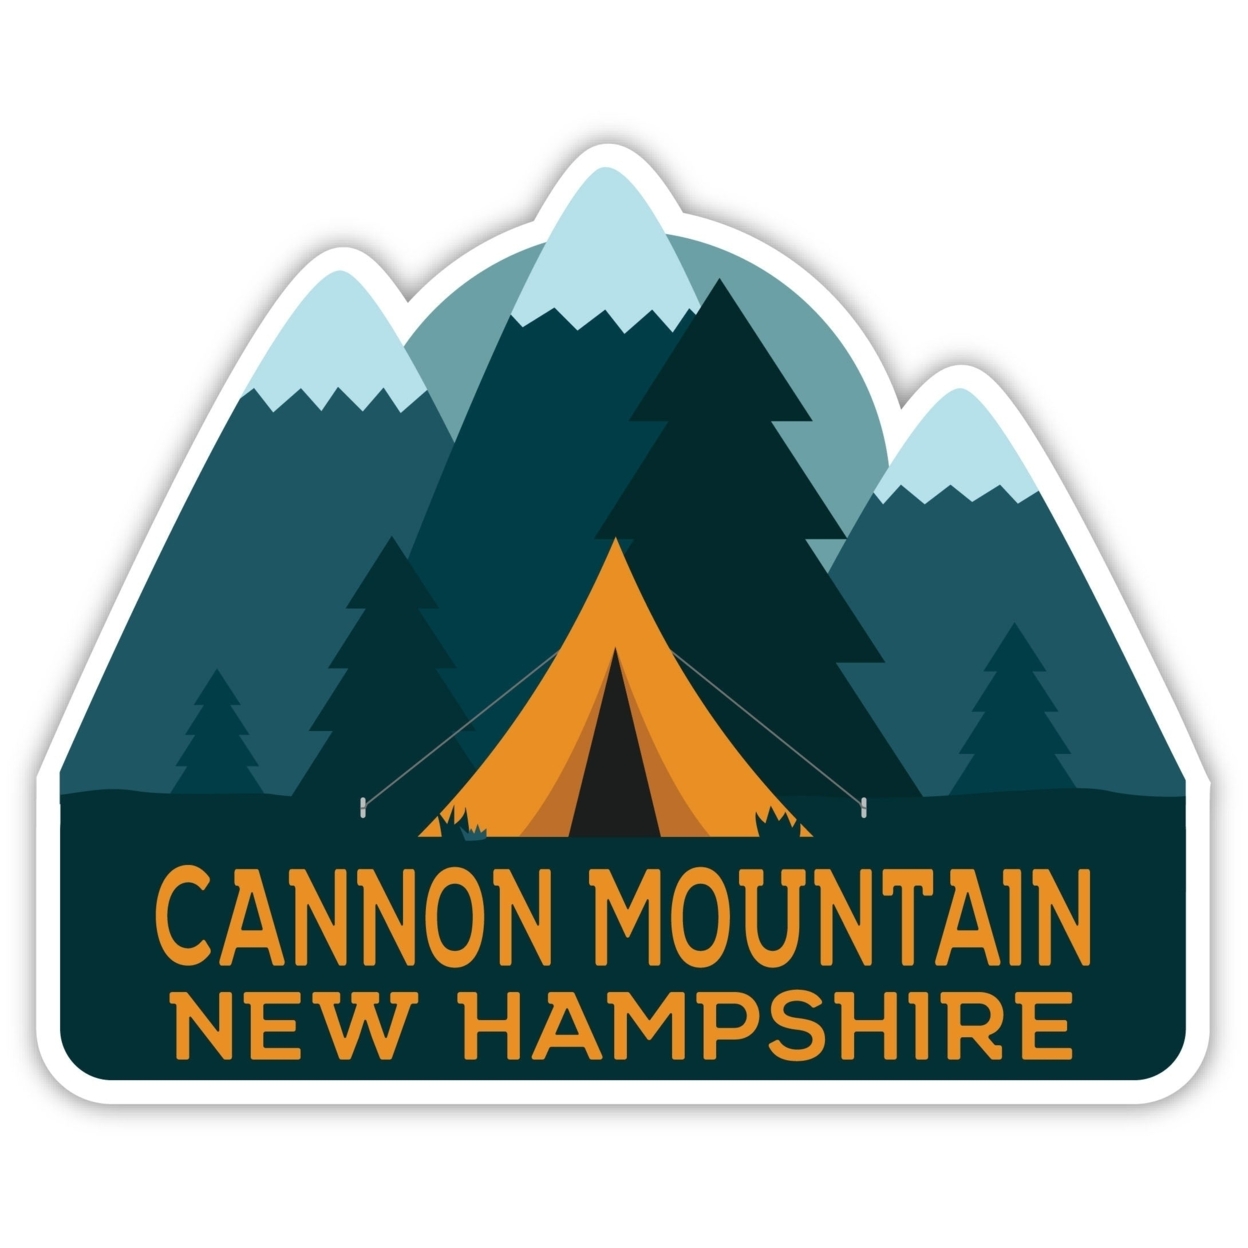 Cannon Mountain New Hampshire Souvenir Decorative Stickers (Choose Theme And Size) - 4-Pack, 10-Inch, Tent